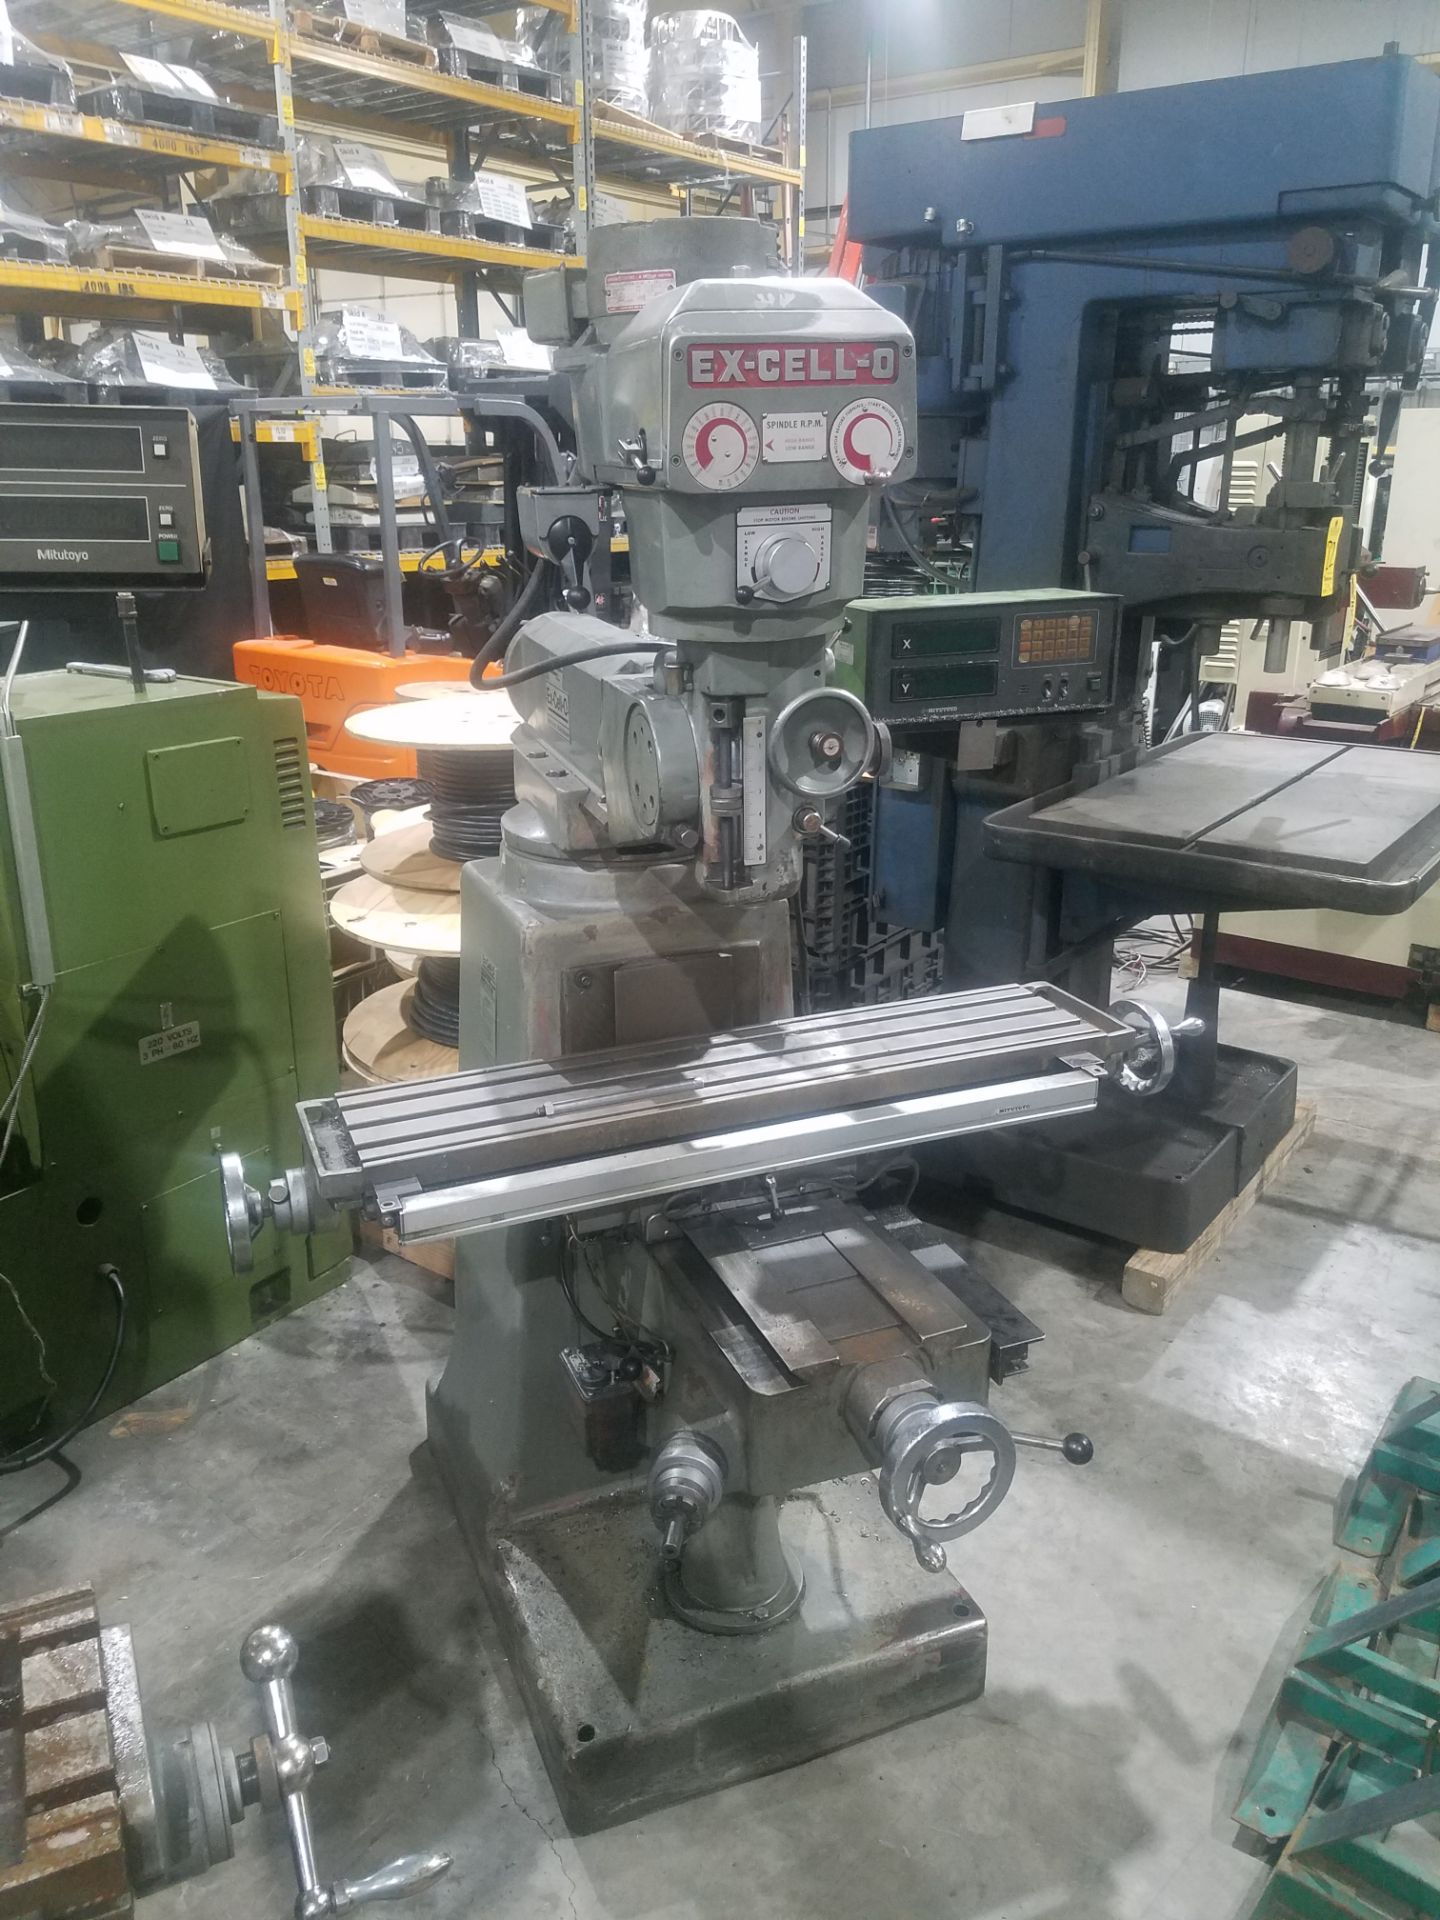 Excello Model 602 Vertical Mill, s/n 60211900, 1 1/2 HP, Mitutoyo D.R.O., Loading Fee $100.00